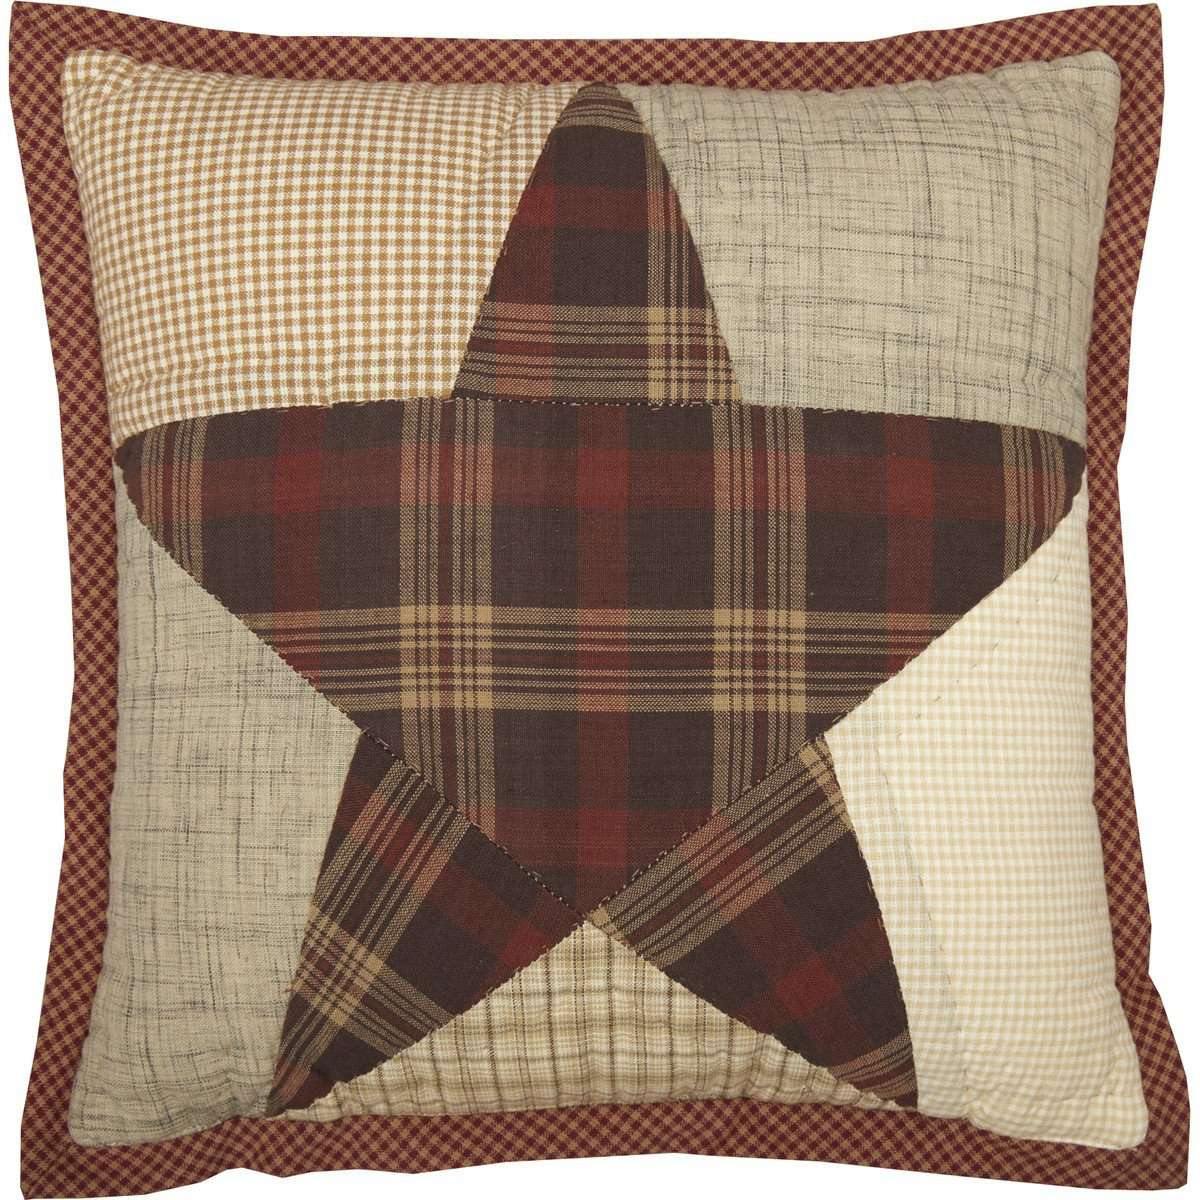 Abilene Star Quilted Pillow 12x12 front